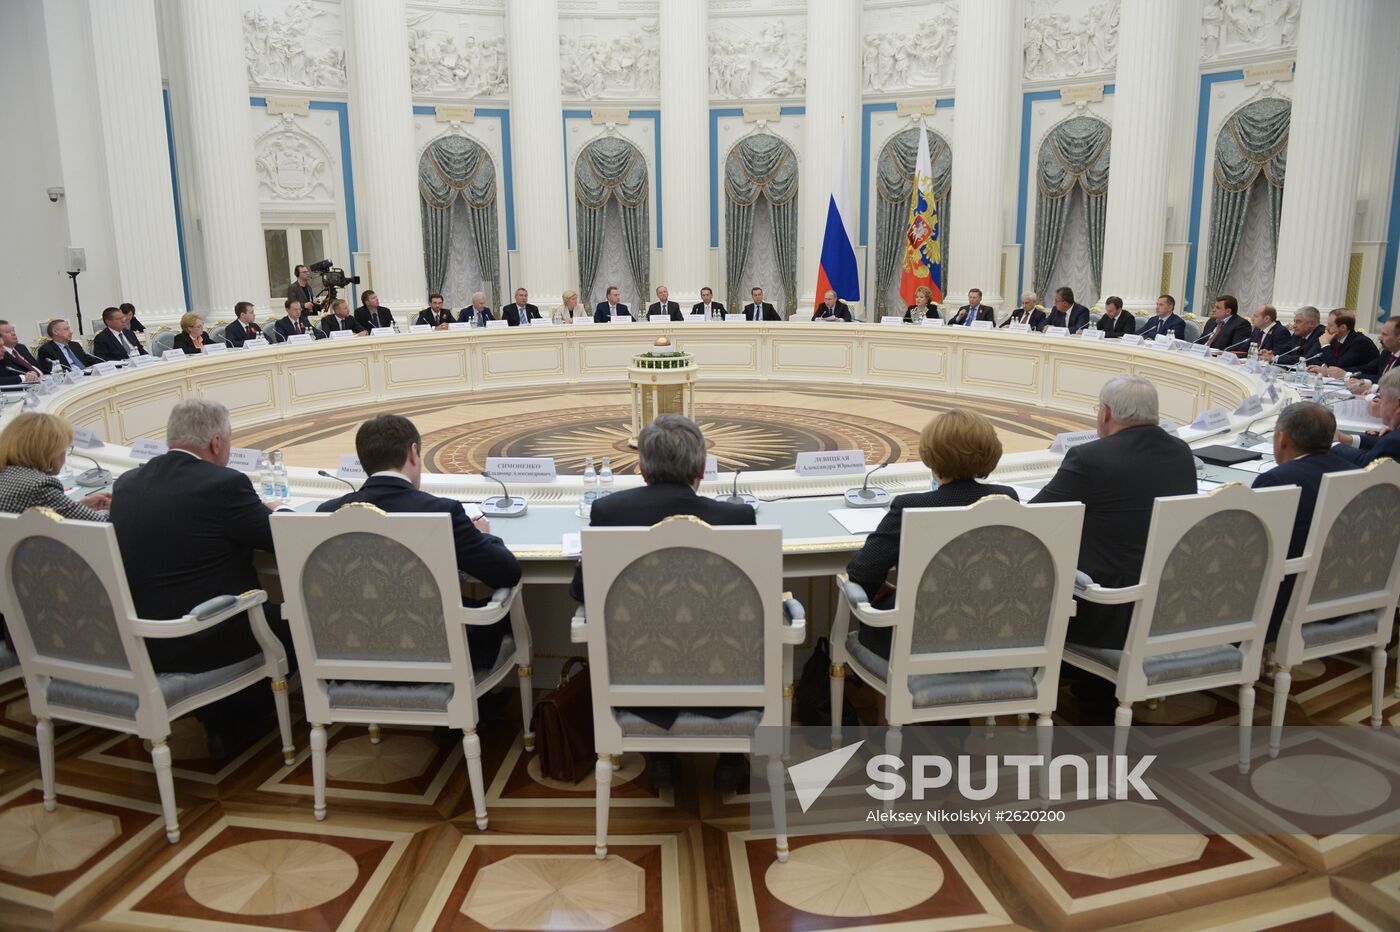 Russian President Vladimir Putin chairs meeting of commission on implementation of presidential executive orders of May 7, 2012